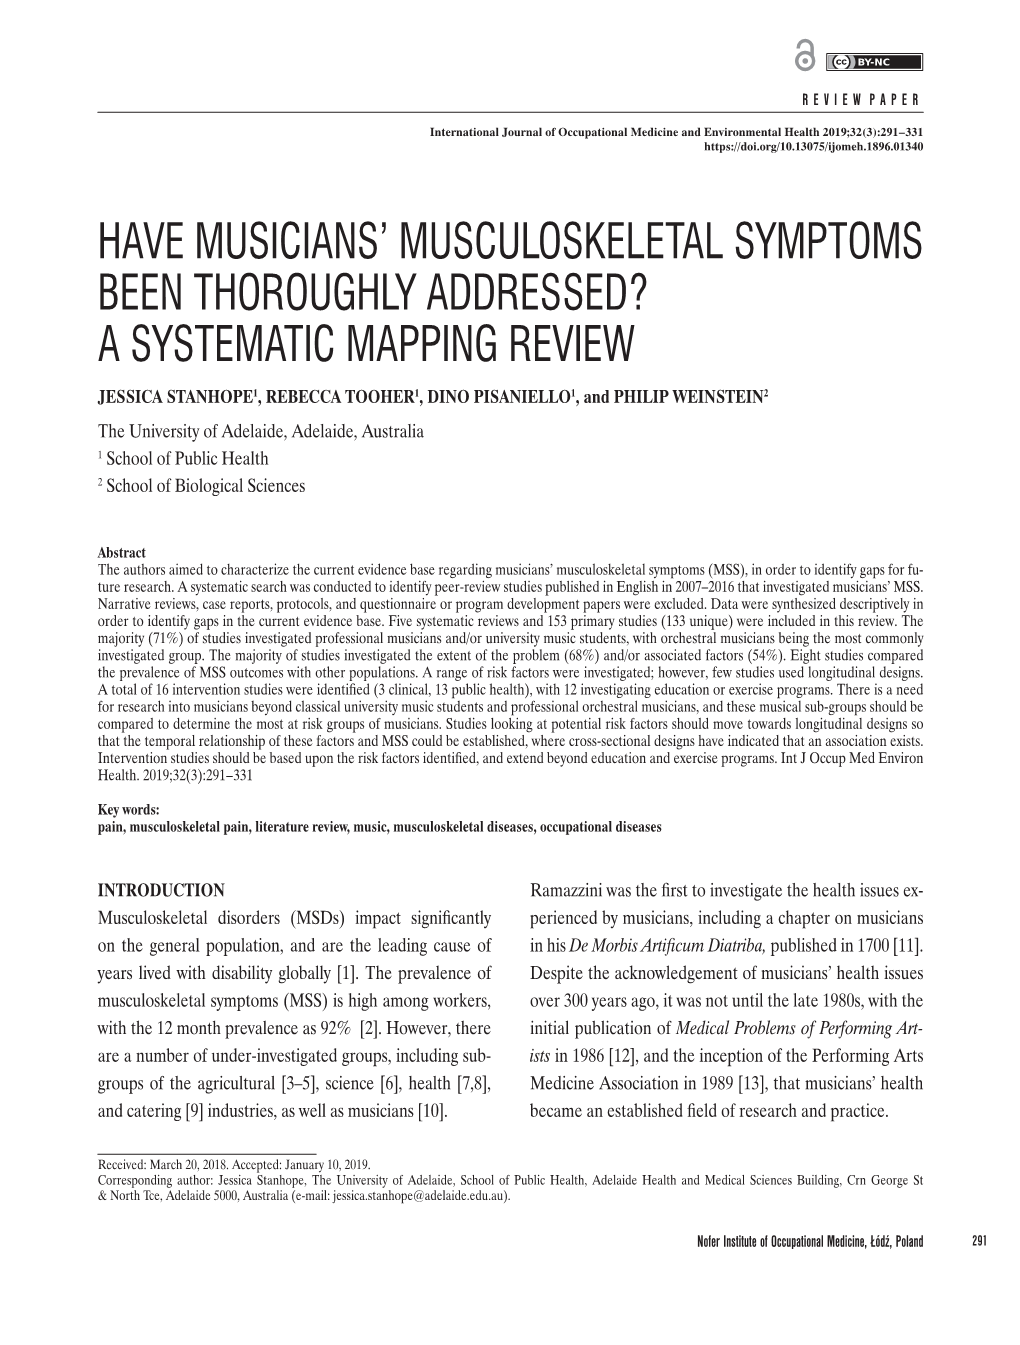 Have Musicians' Musculoskeletal Symptoms Been Thoroughly